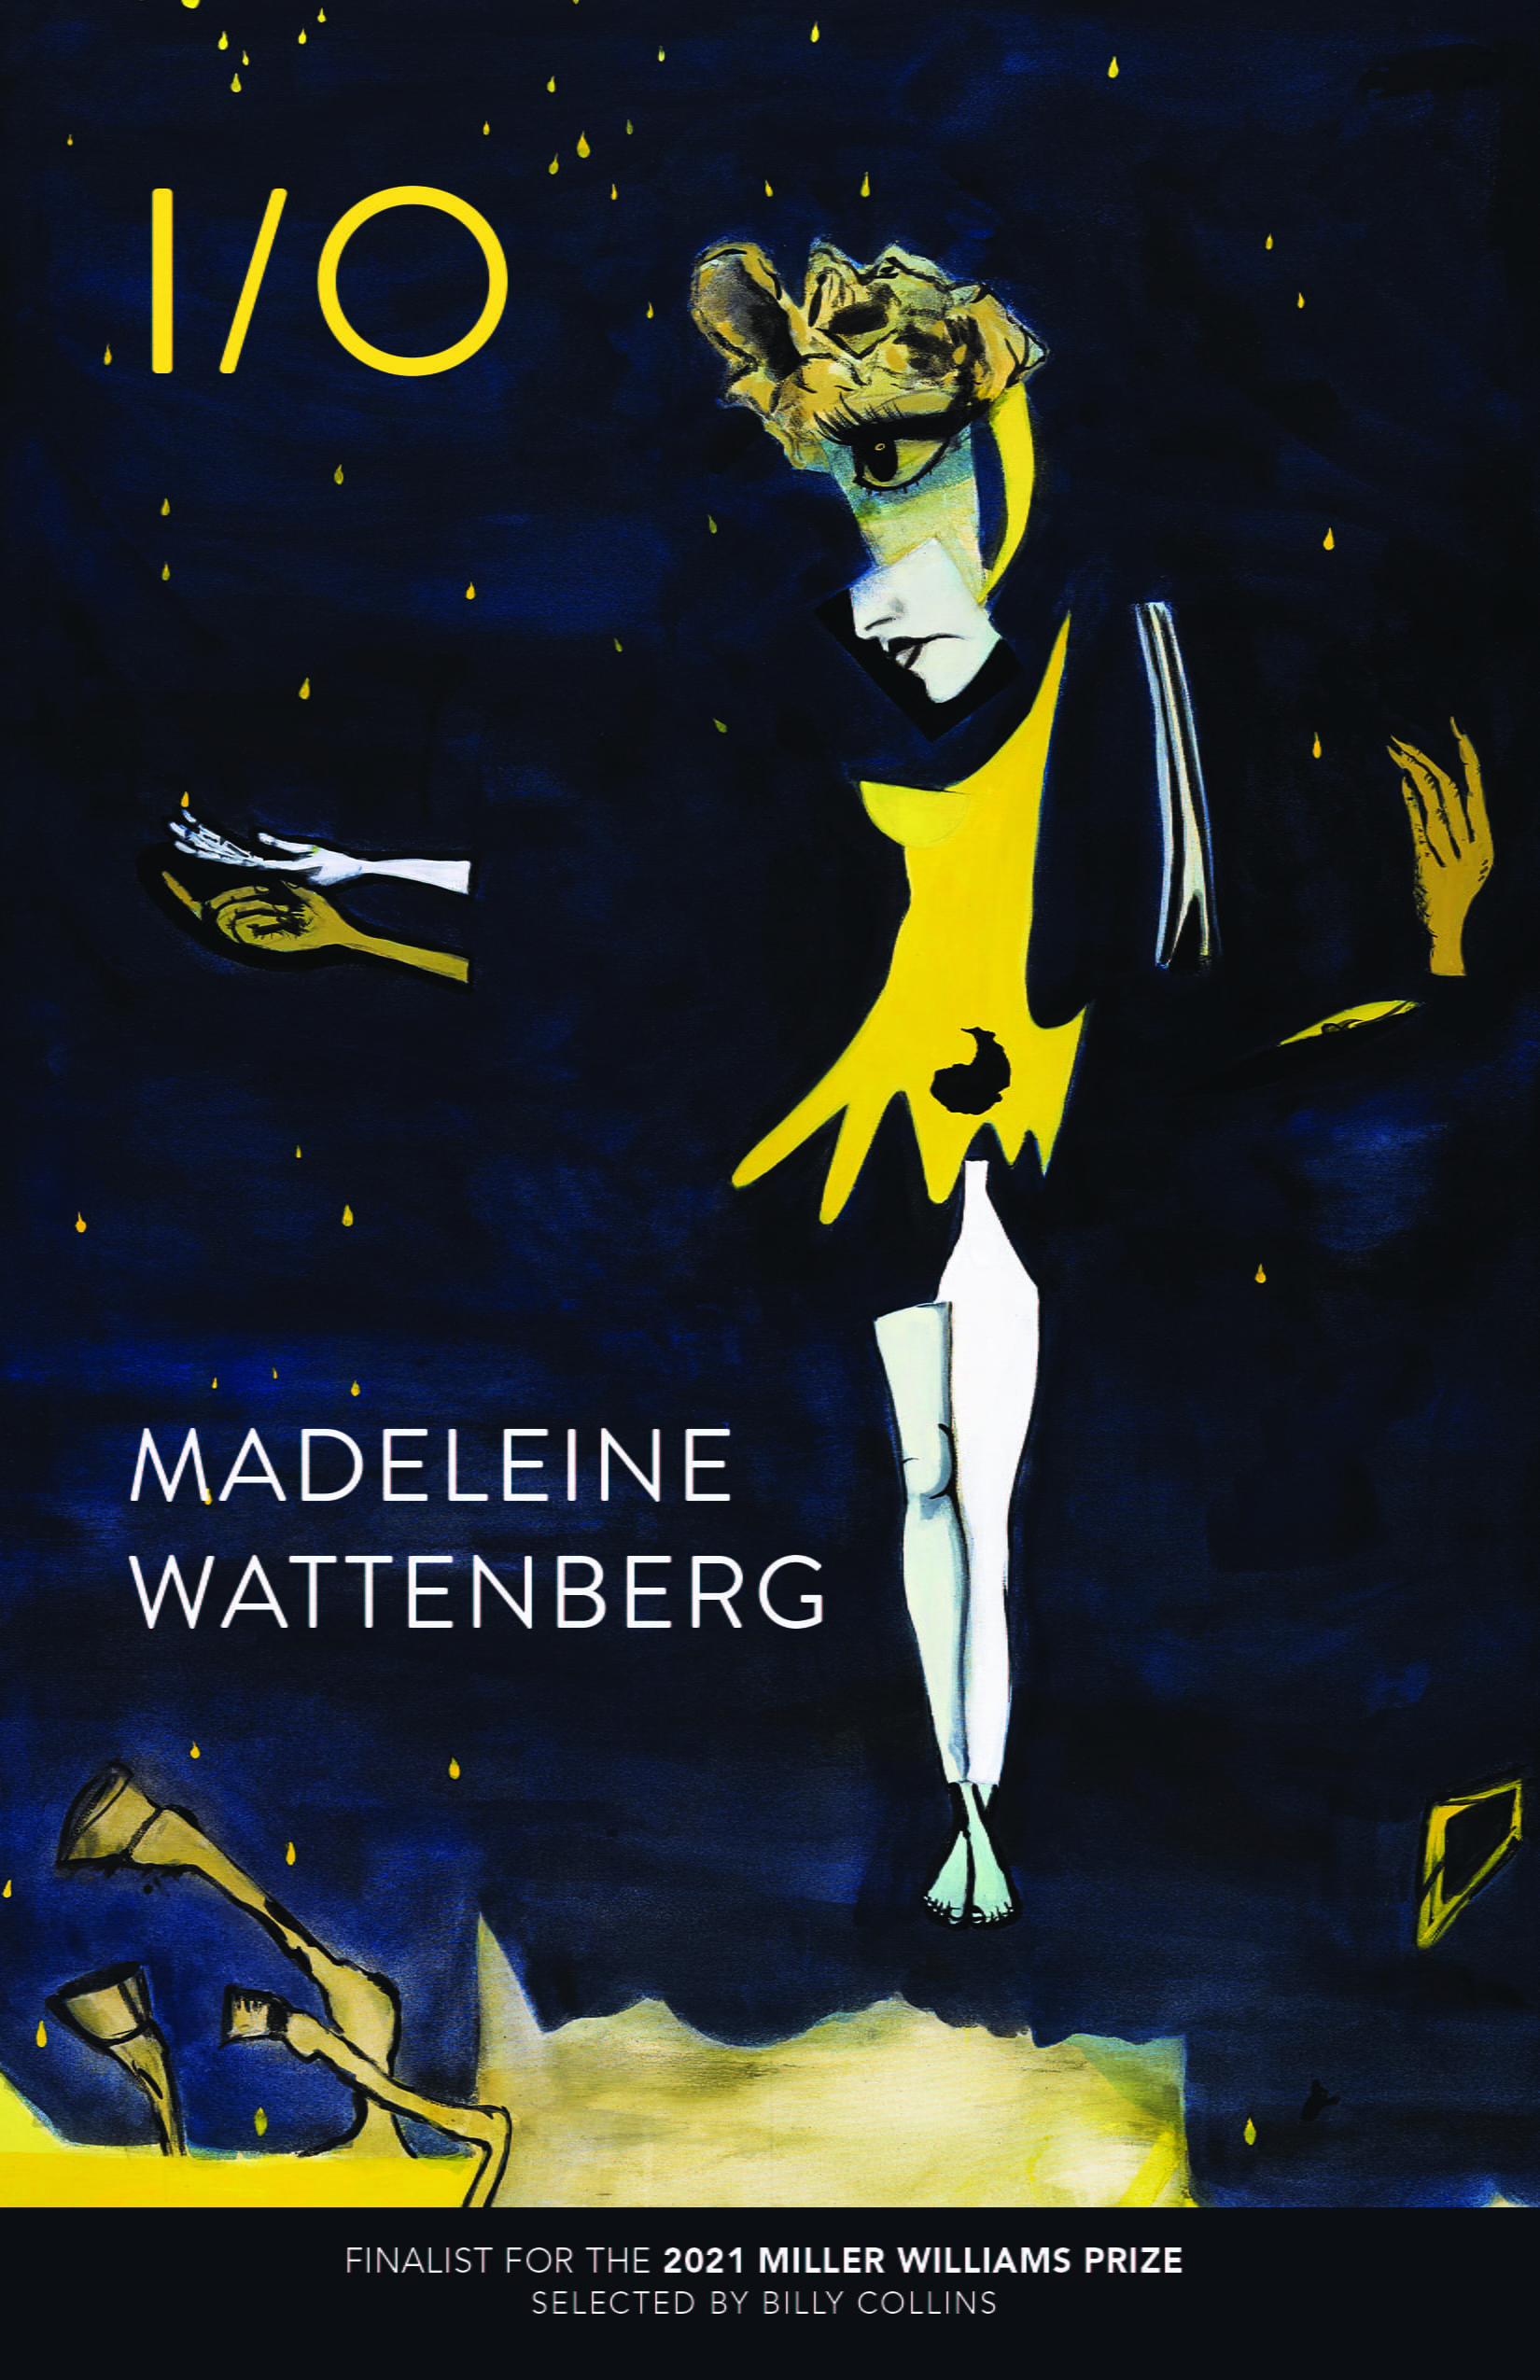 cover image for I/O by Madeleine Wattenberg